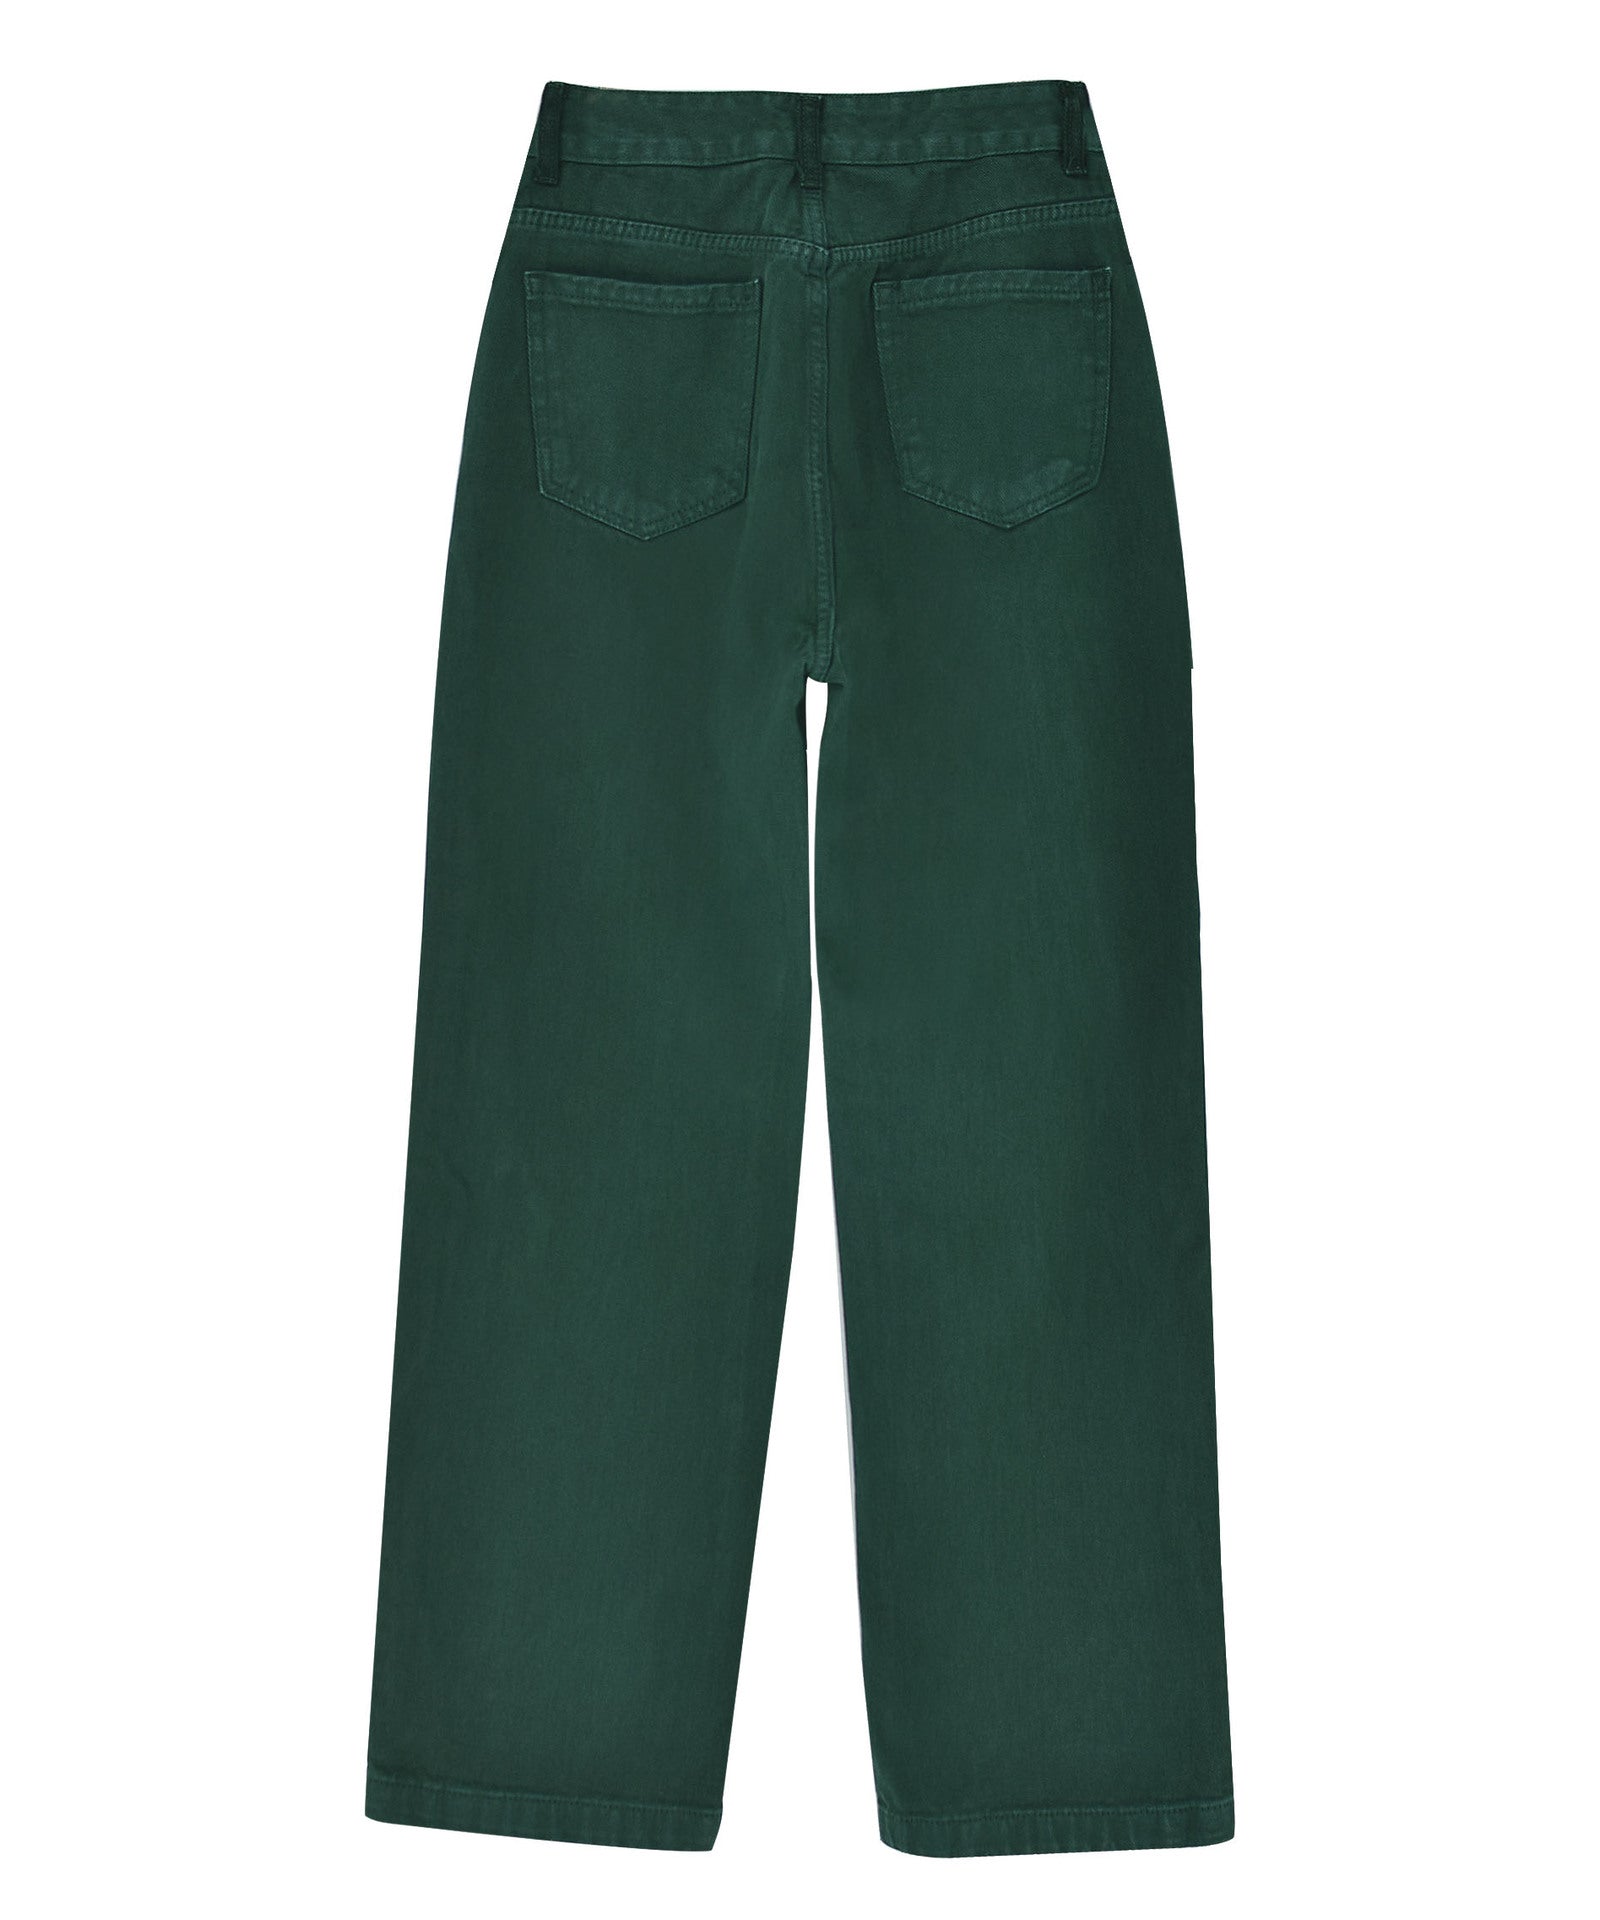 Green High-Rise Loose Jeans by Re/Done on Sale